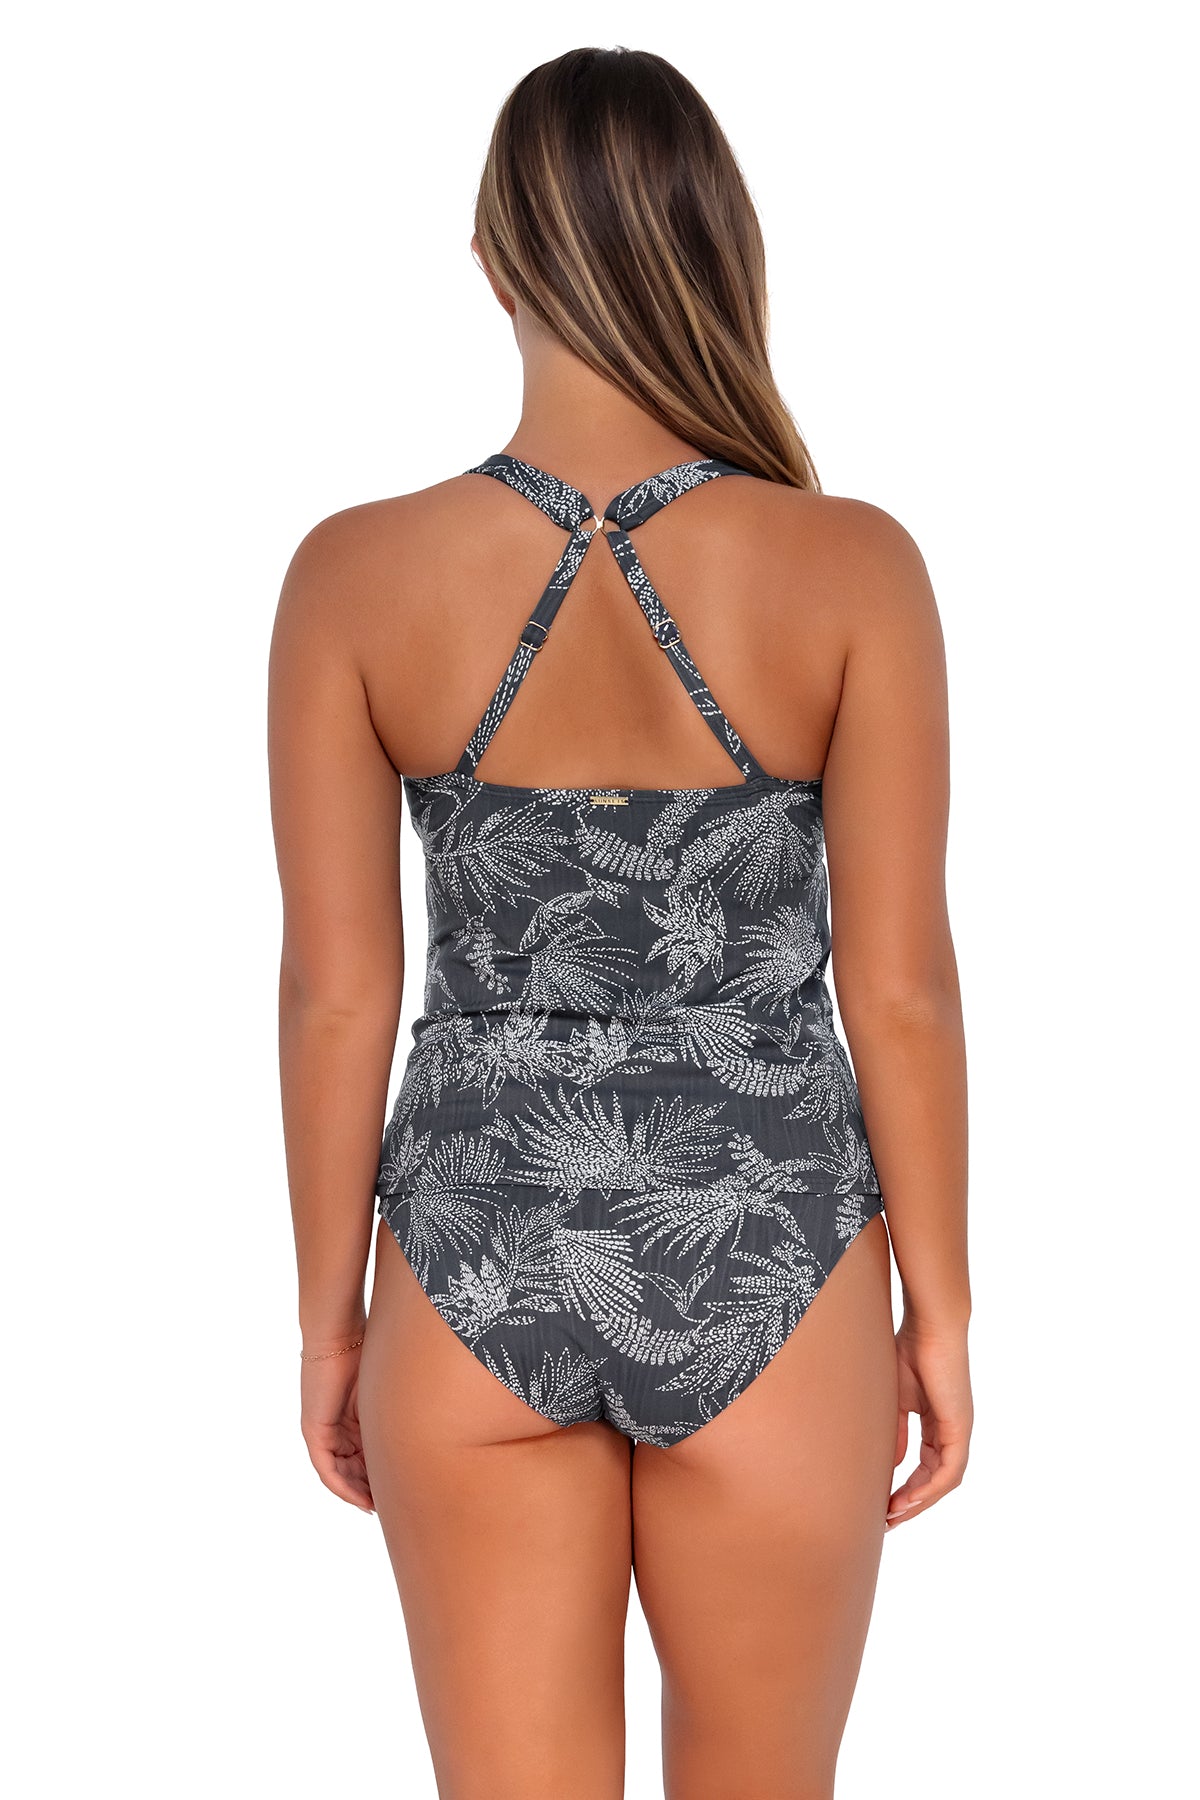 Back pose #1 of Taylor wearing Sunsets Fanfare Seagrass Texture Elsie Tankini Top showing crossback straps with matching Hannah High Waist bikini bottom